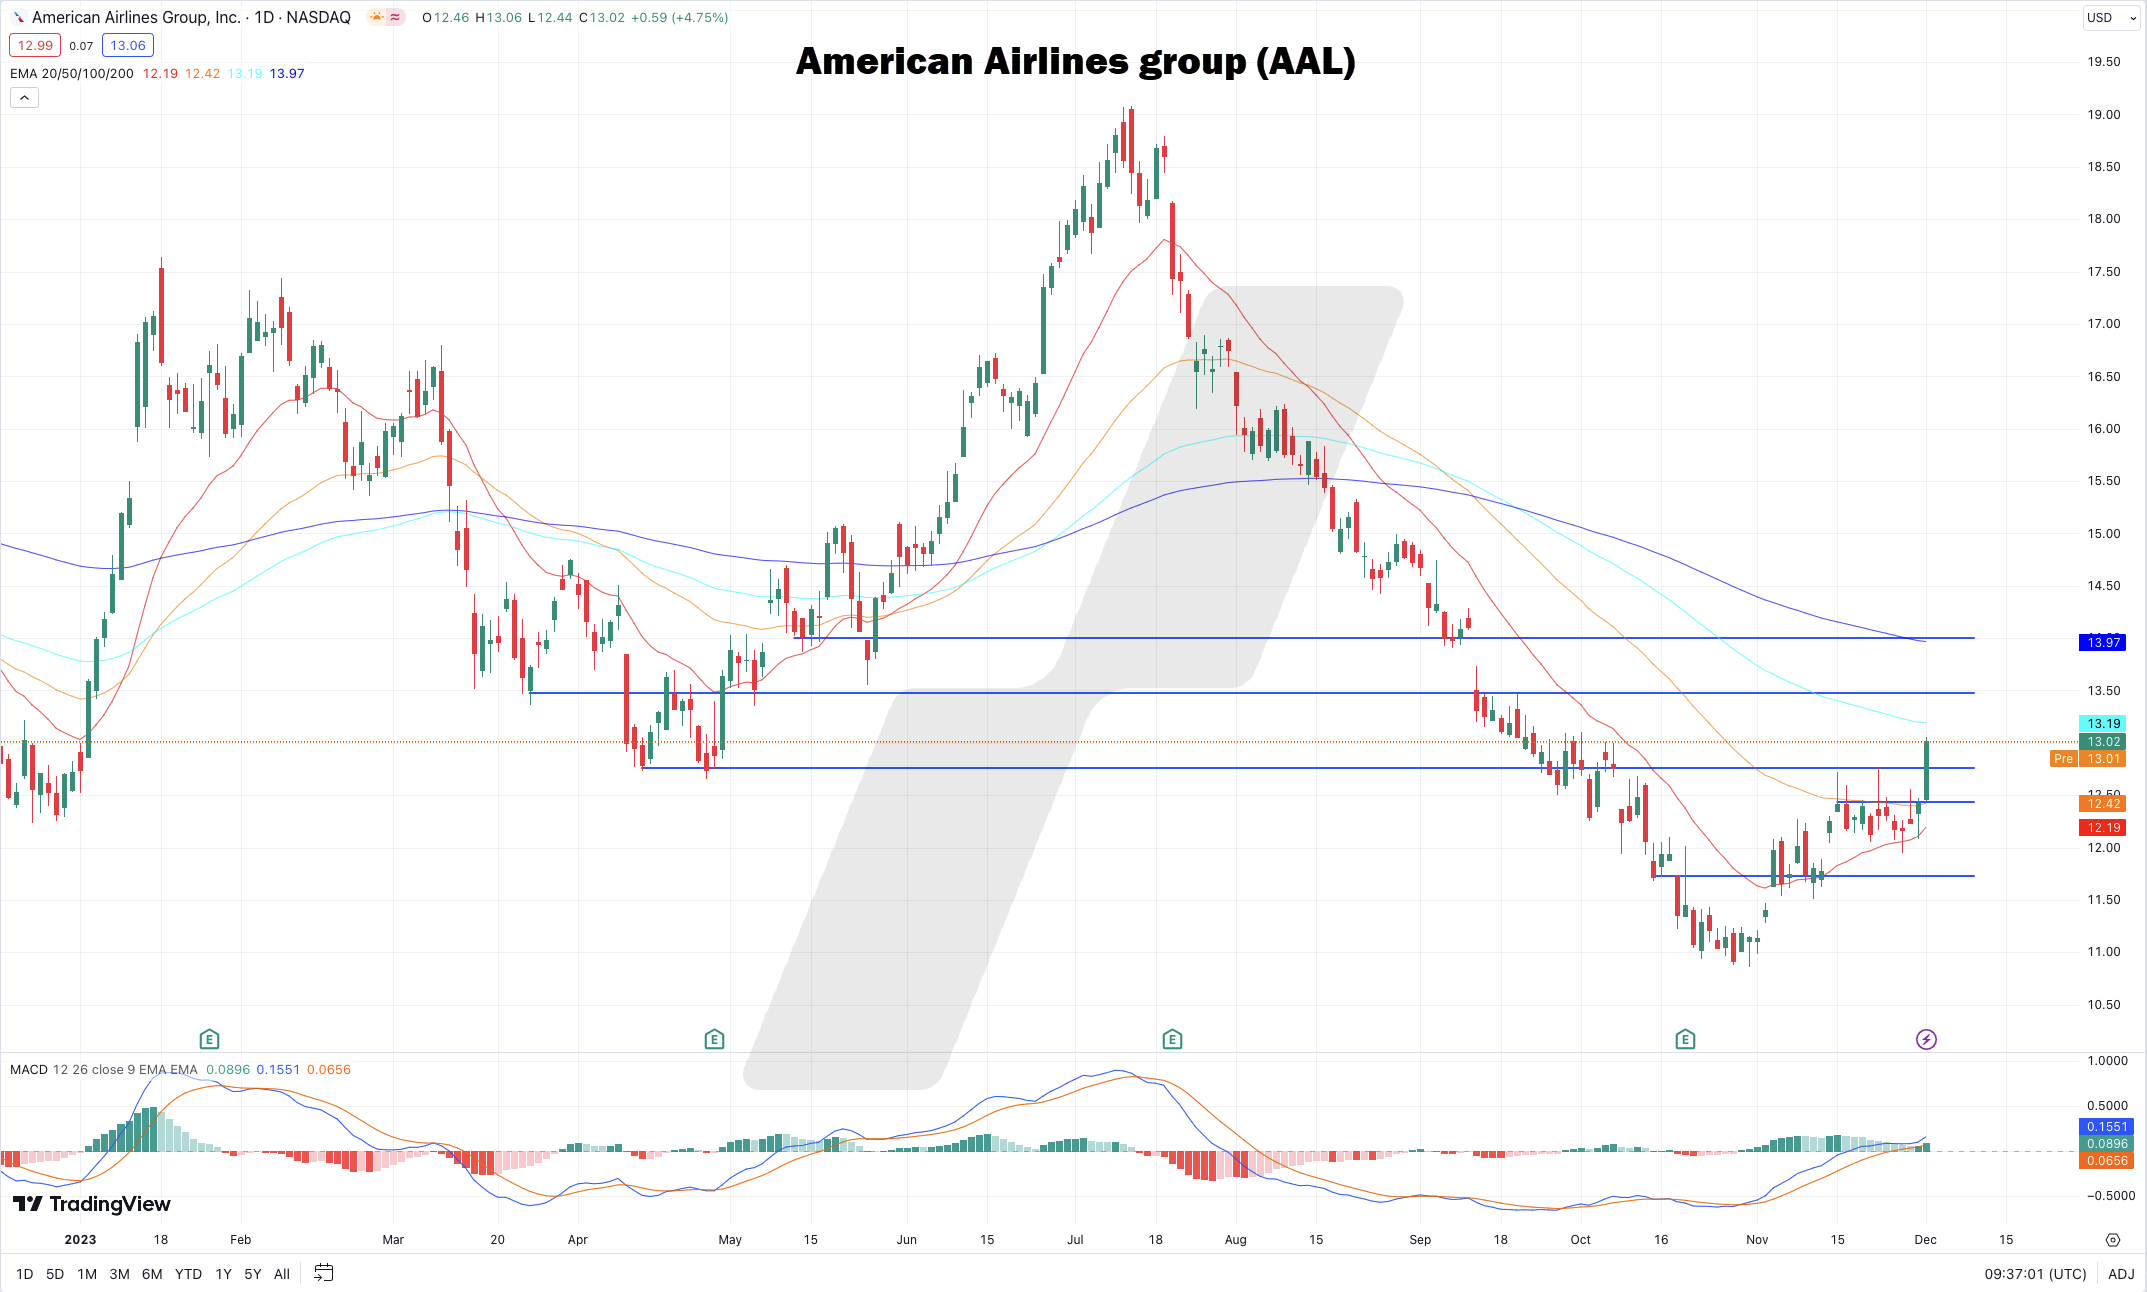 Technische analyse American Airlines Group (AAL)